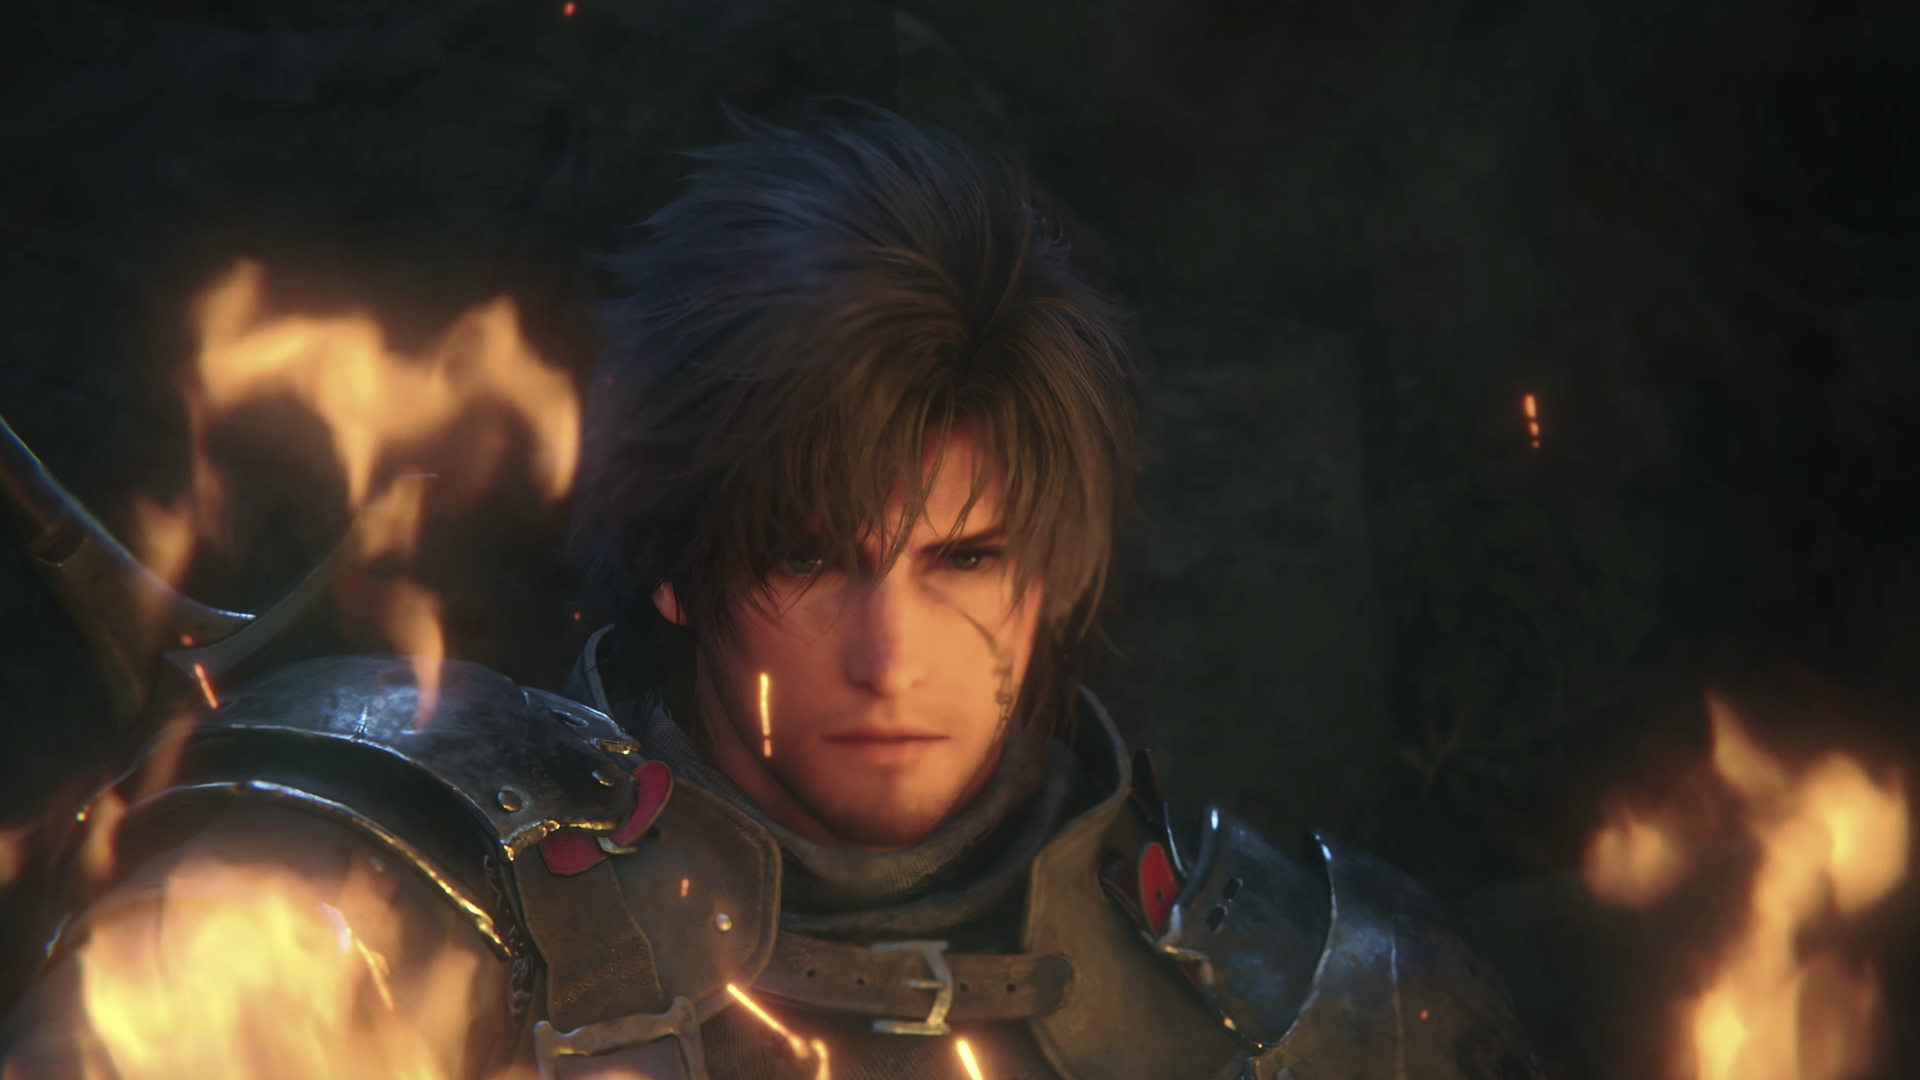 Video game screenshot showing the close-up of a dark-haired man.